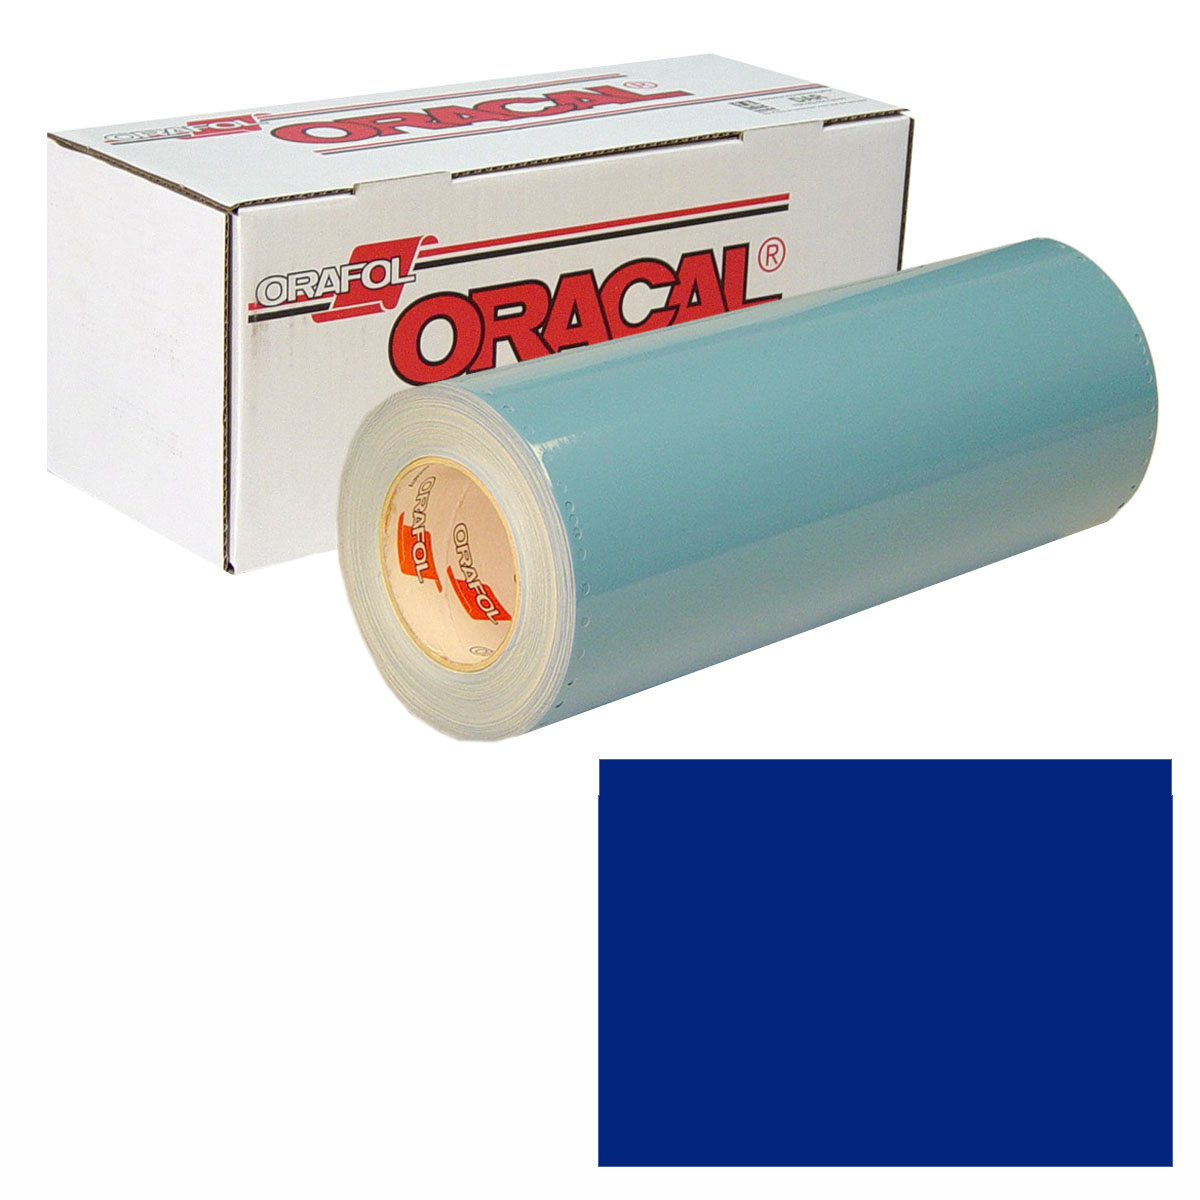 ORACAL 951 30in X 50yd 536 Middle Blue